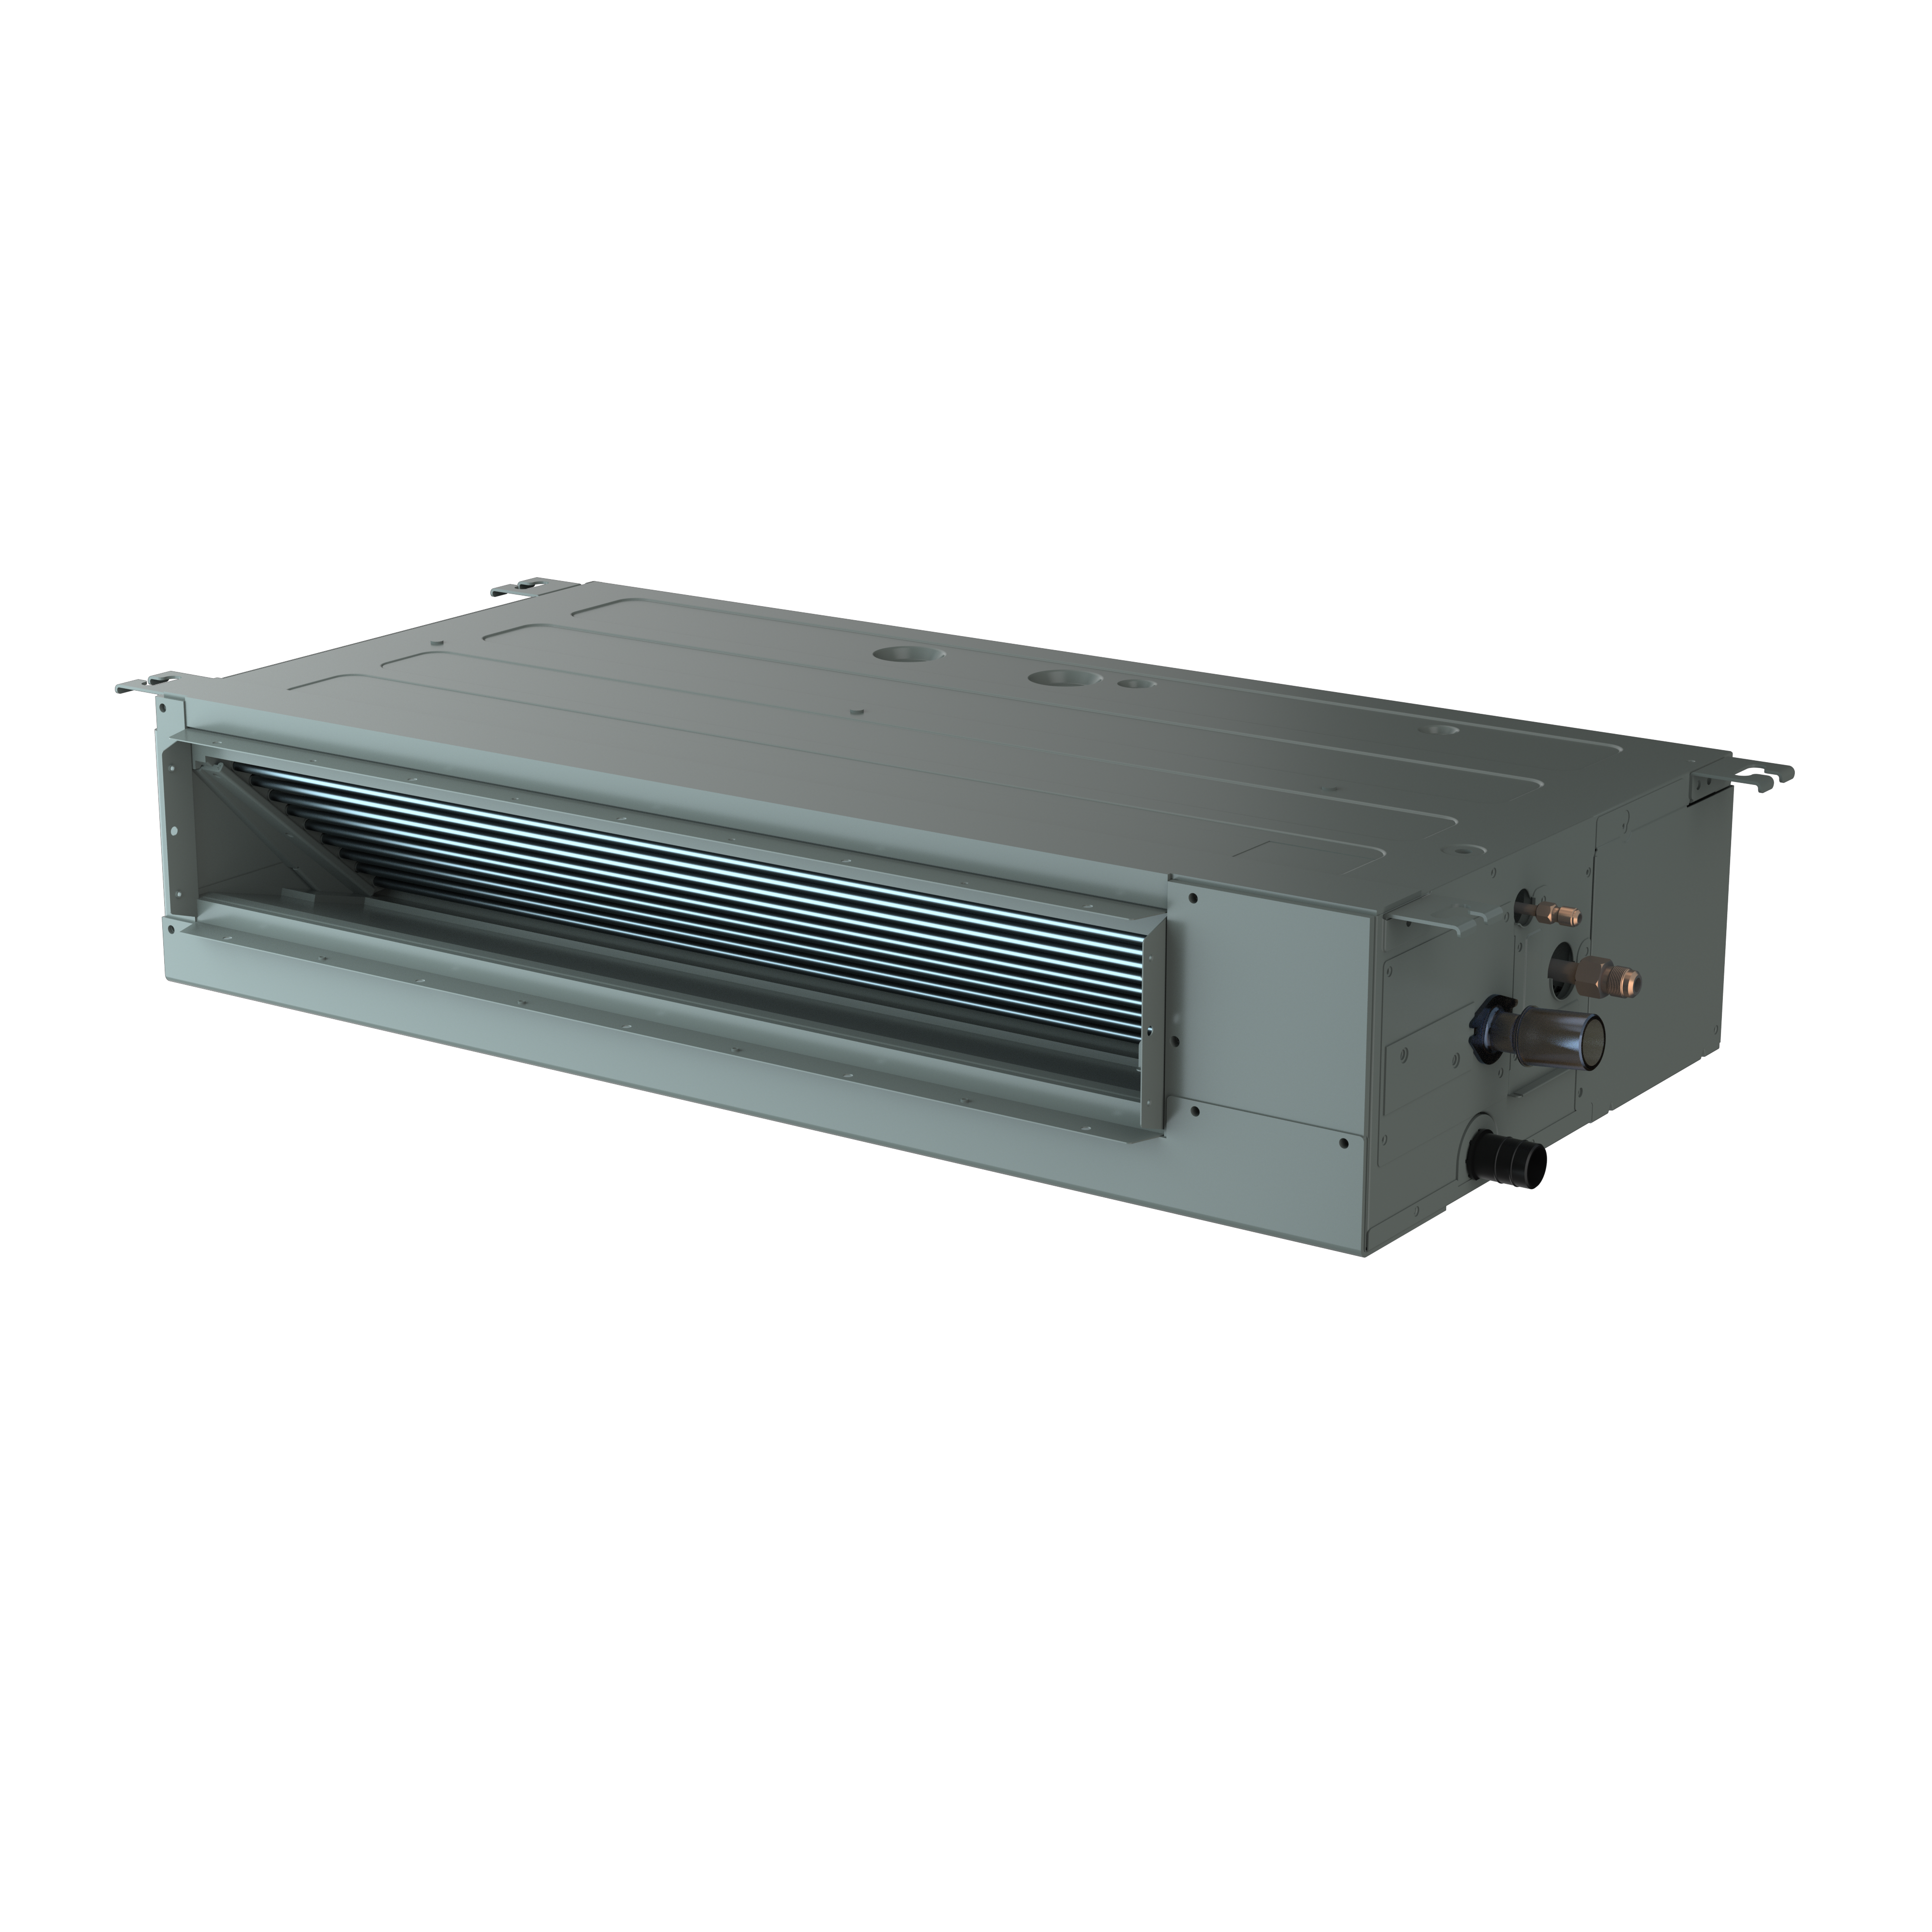 Air-Con Sky Pro Series 9,000 BTU 19 SEER Single Zone Concealed Duct Mini Split Air Conditioner and Heater System